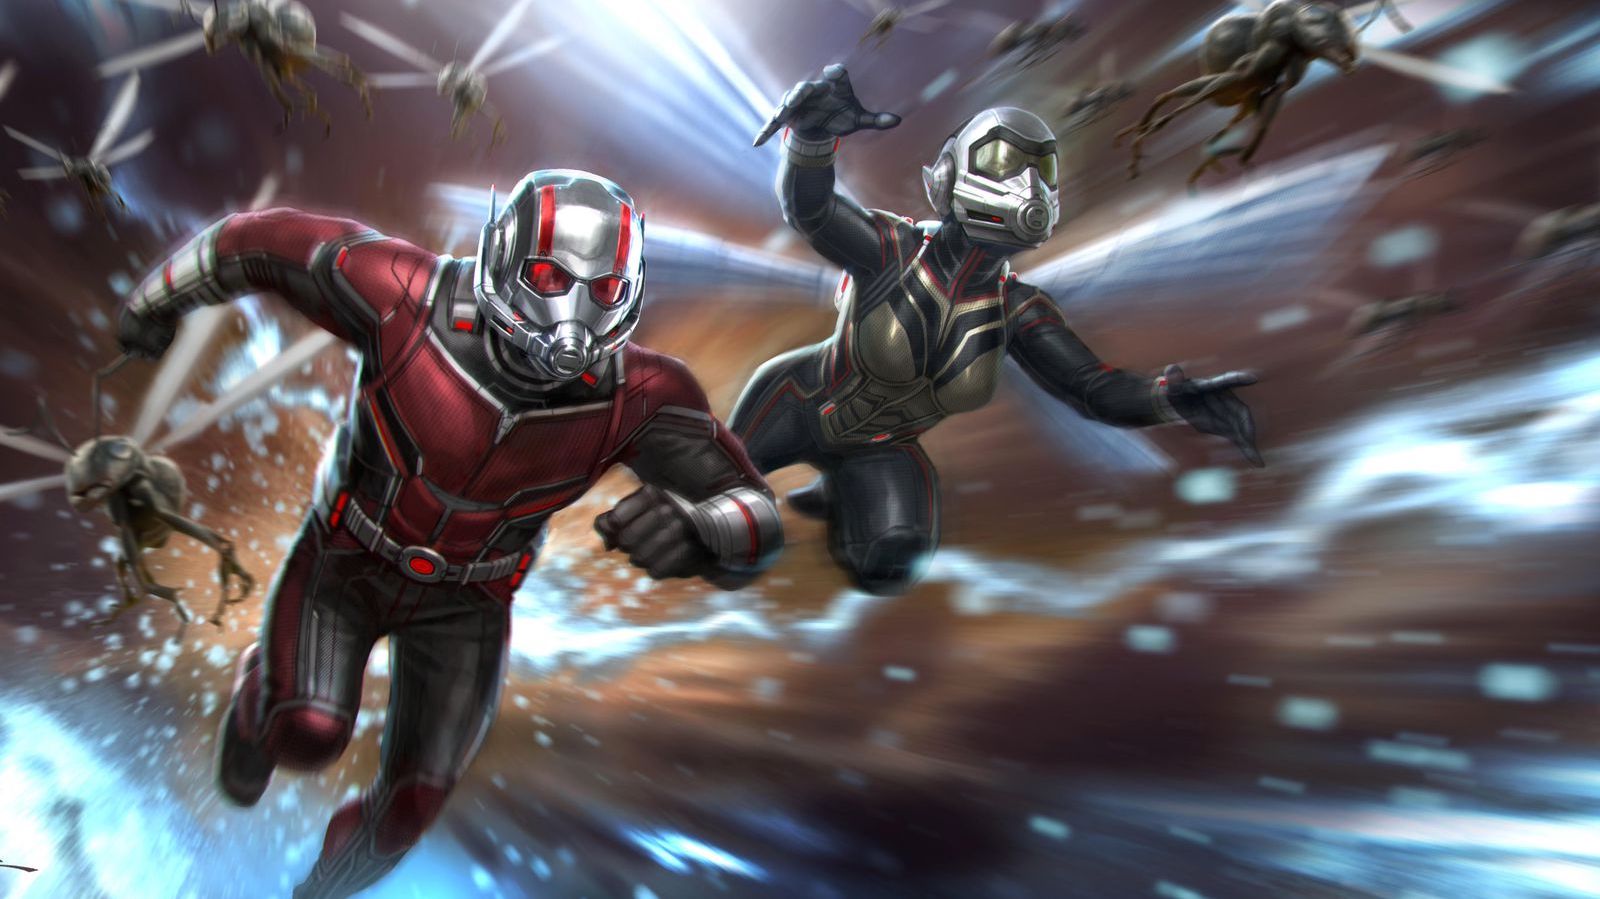 The Ant-Man and the Wasp Movie: Will It Be Good?